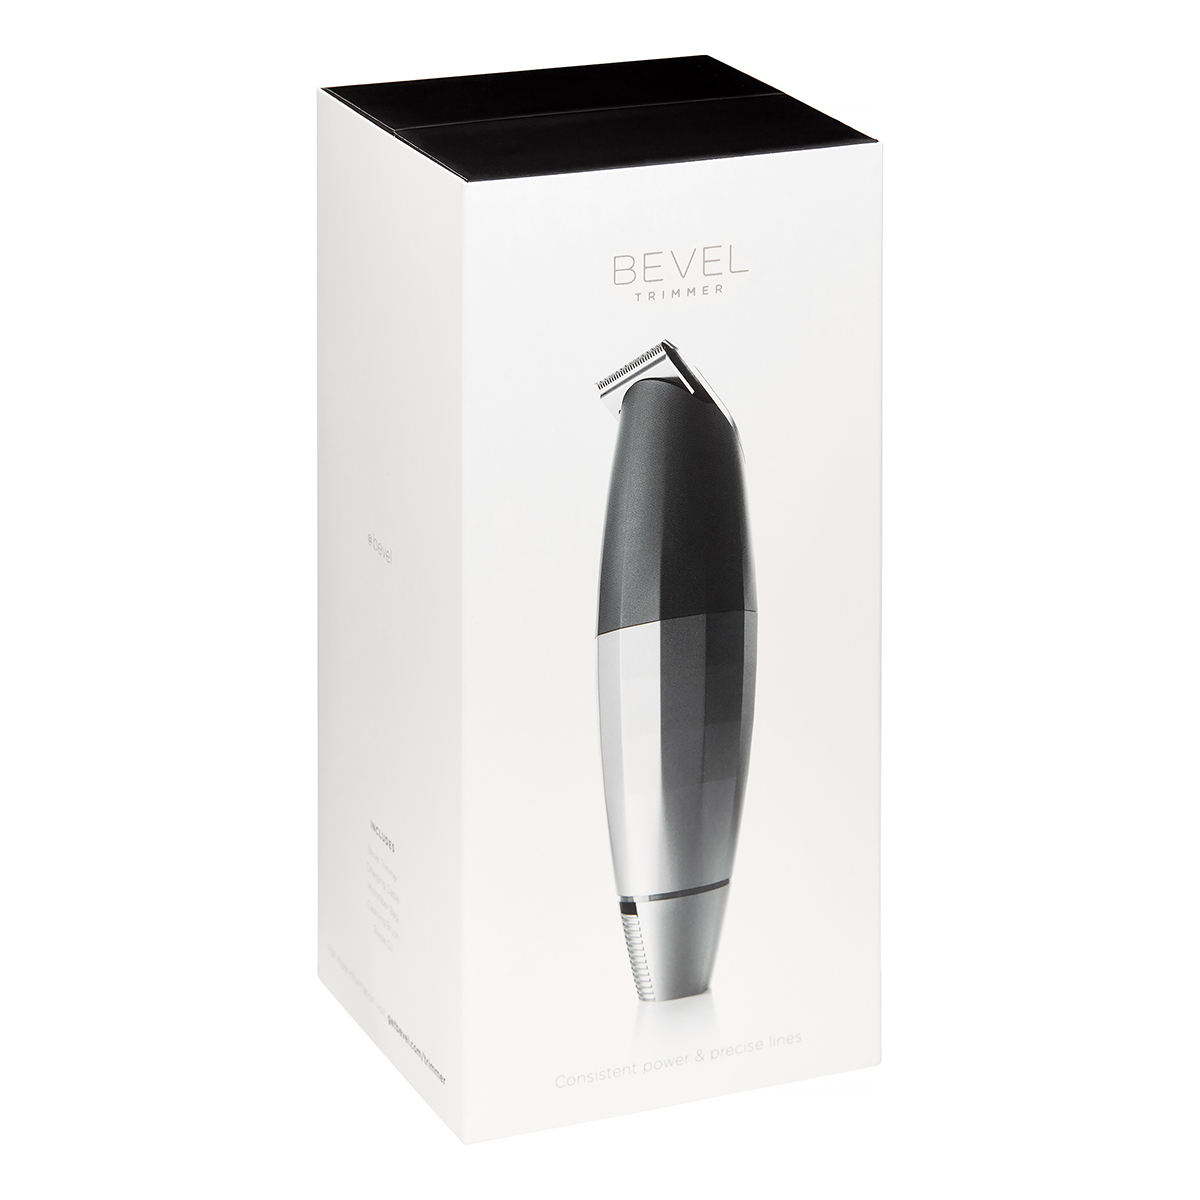 bevel clippers review